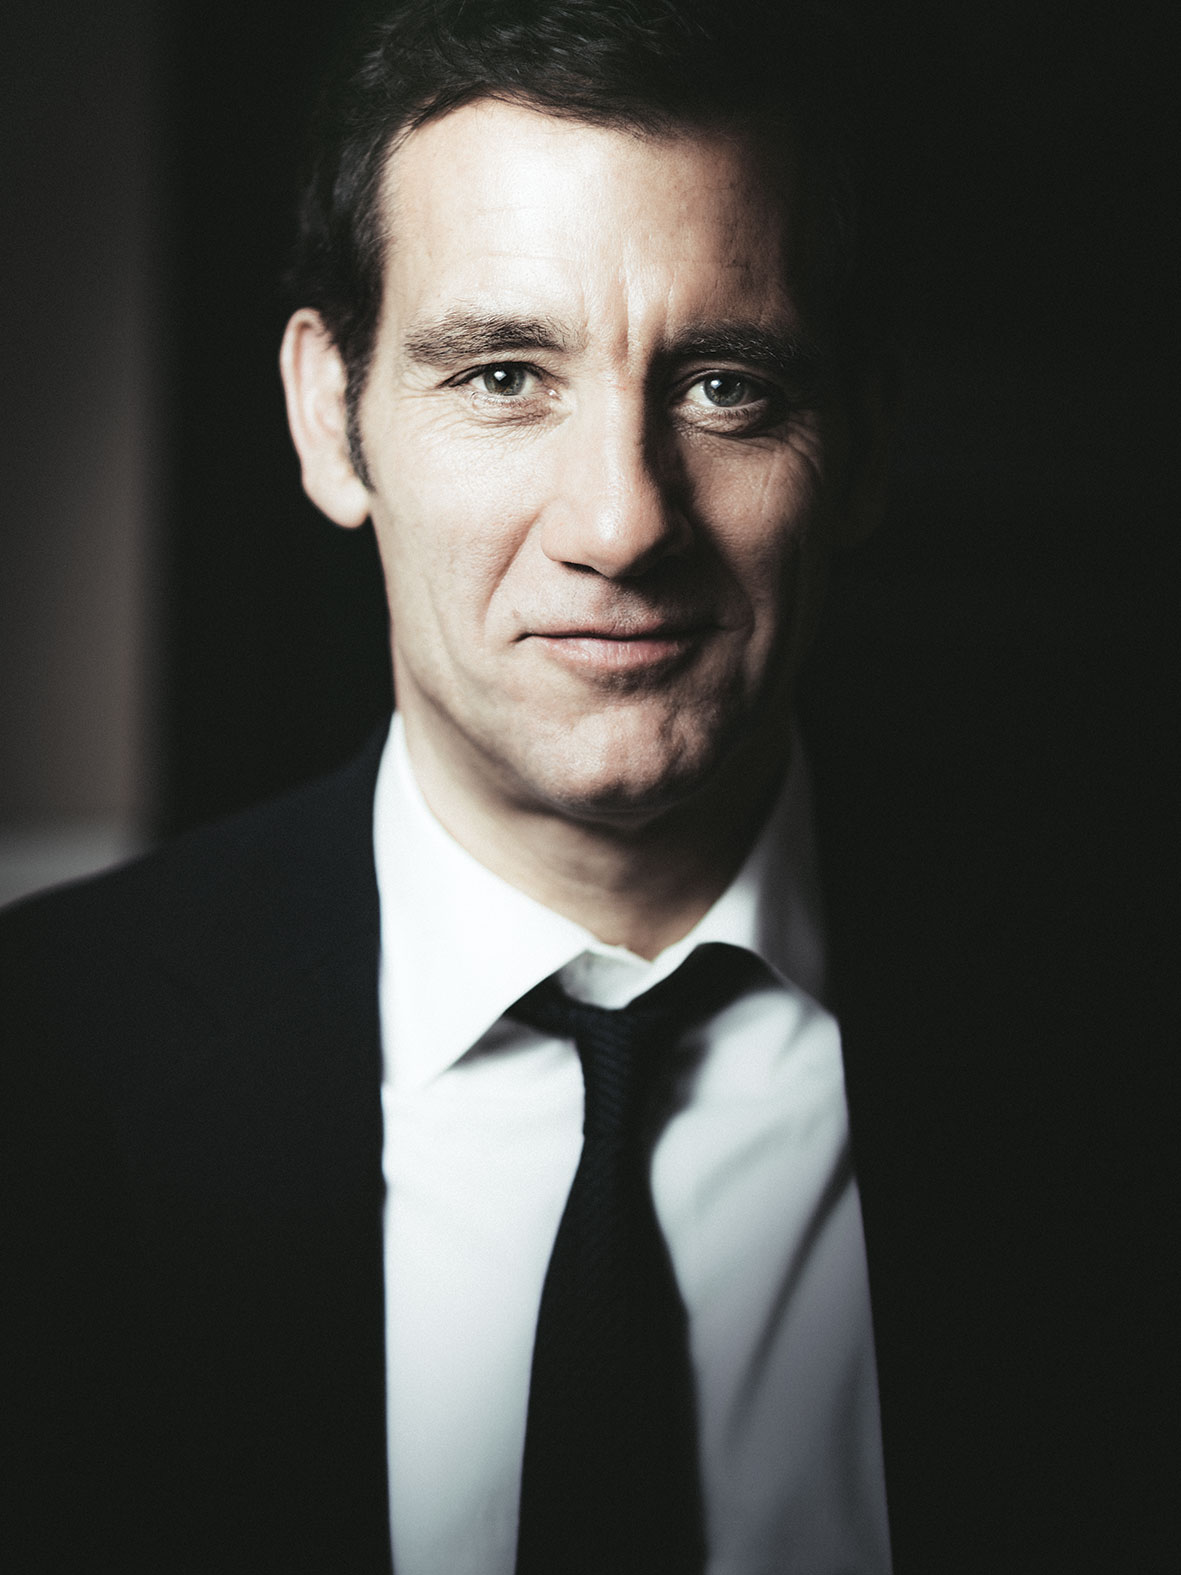 An Inside Look as Clive Owen Discusses his Partnership with Jaeger-LeCoultre